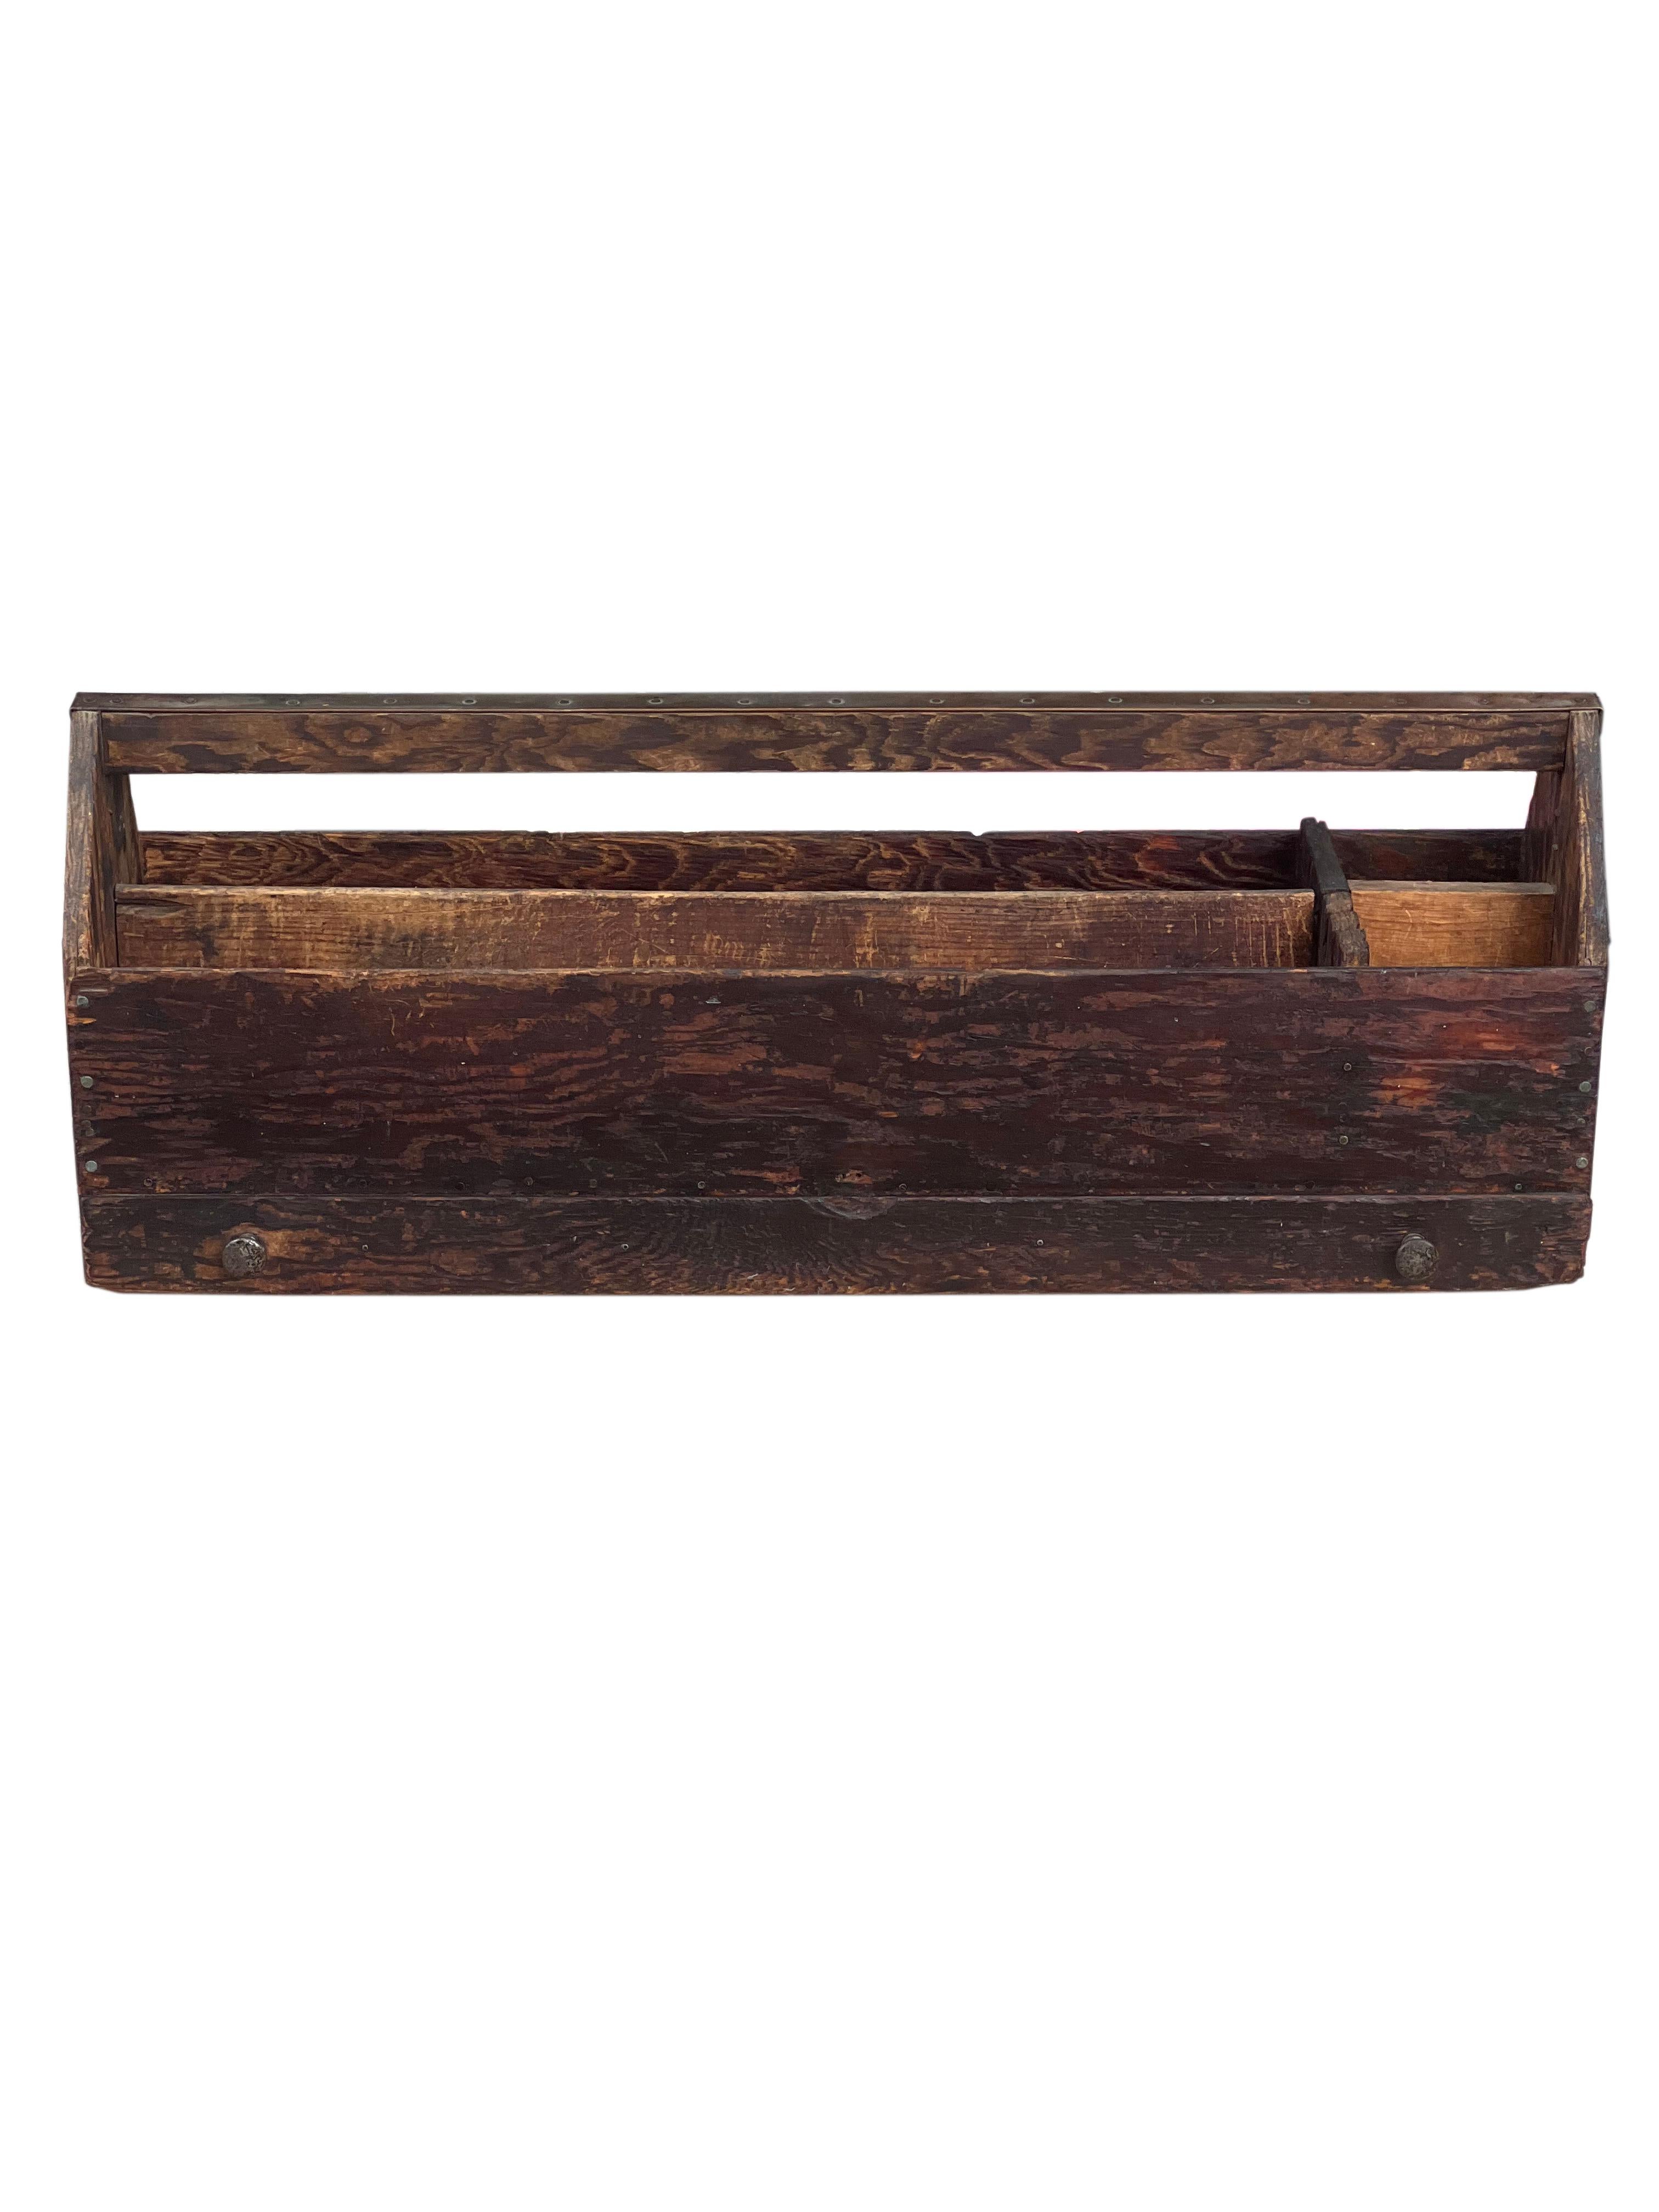 antique wooden tool caddy